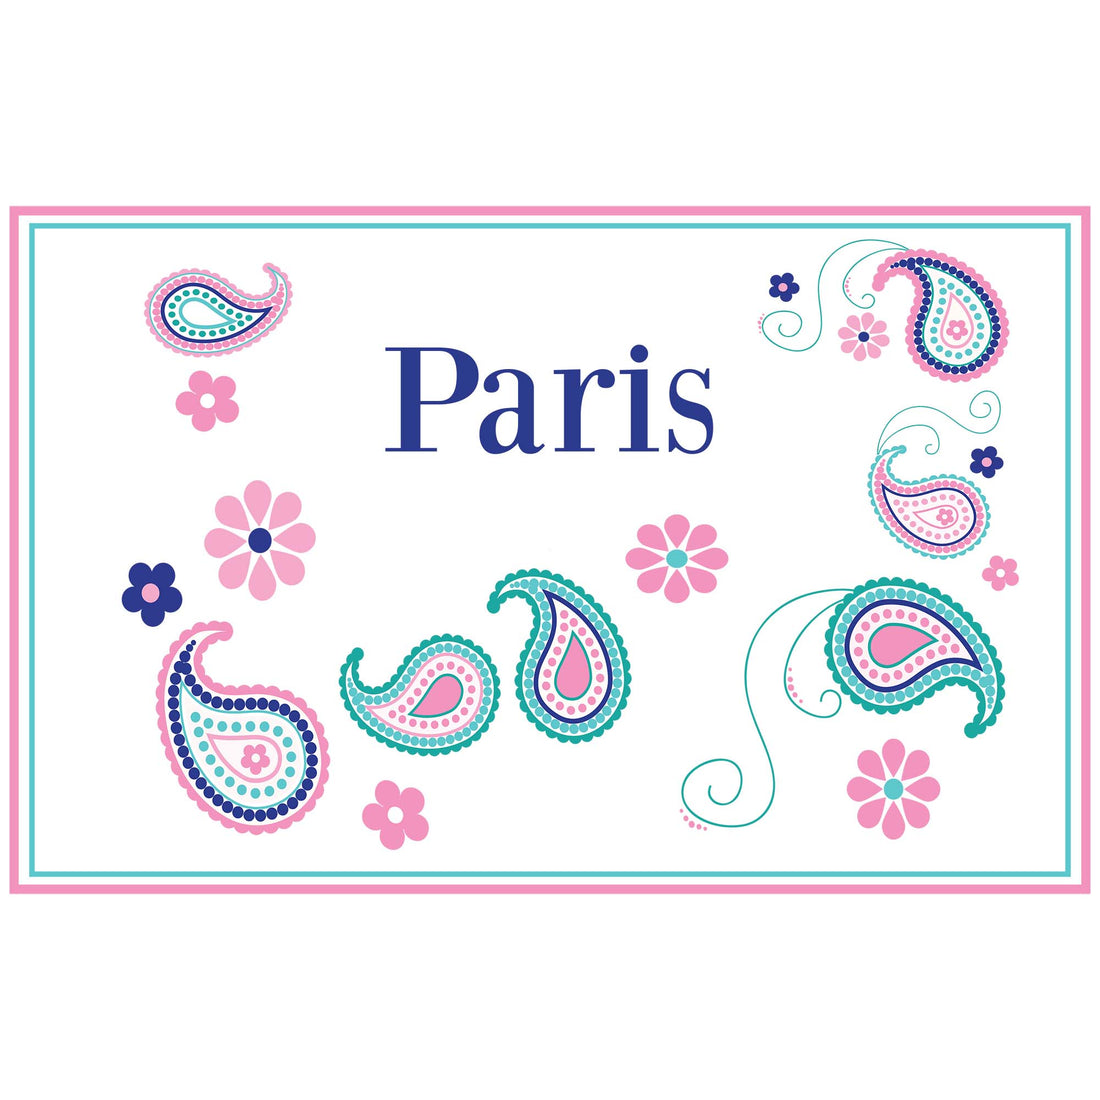 Personalized Placemat with Paisley Teal and Pink design